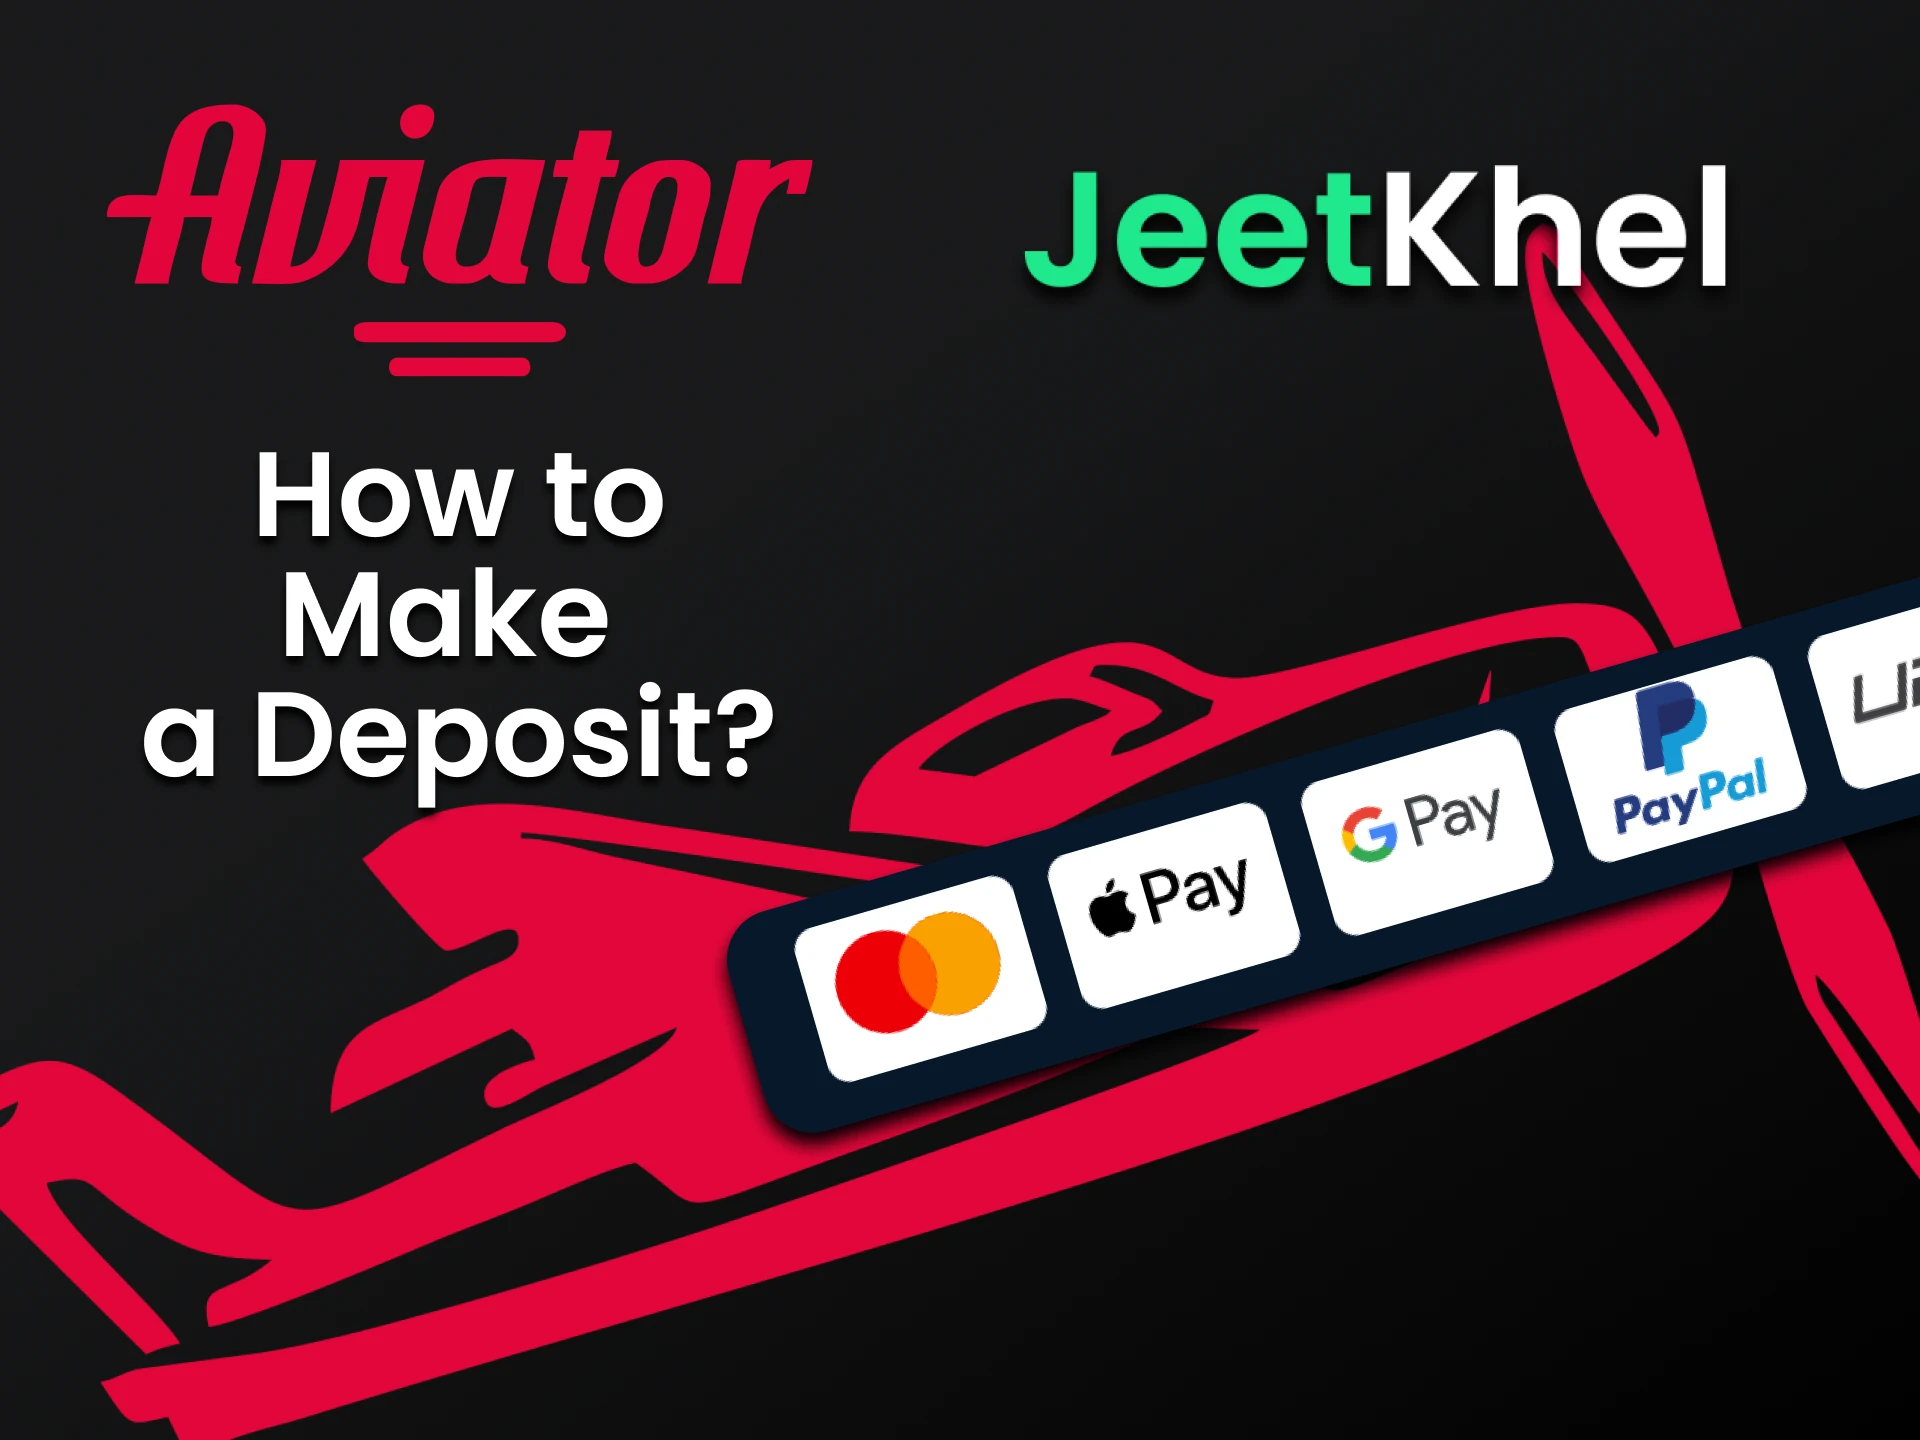 Find out about the recharge options on the JeetKhel website.